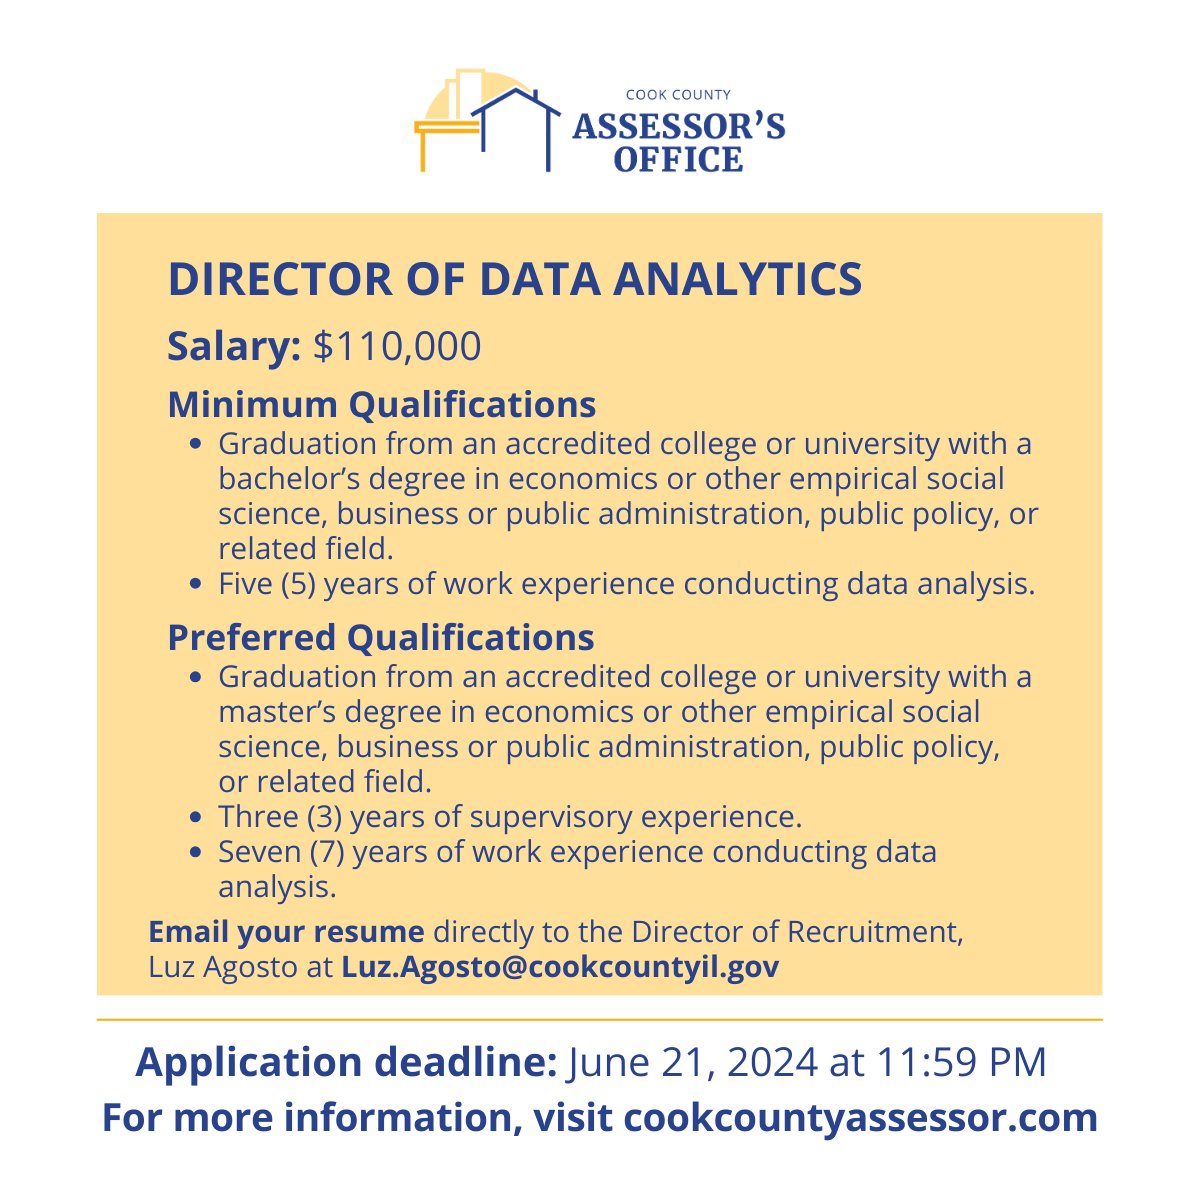 Do you have experience using data analysis + visualization tools such as R, python, Tableau, or Power BI? Are you interested in property tax equity? Then check out our job opening for Director of Data Analytics: cookcountyassessor.com/job-opportunit… Email resume to Luz.Agosto@cookcountyil.gov